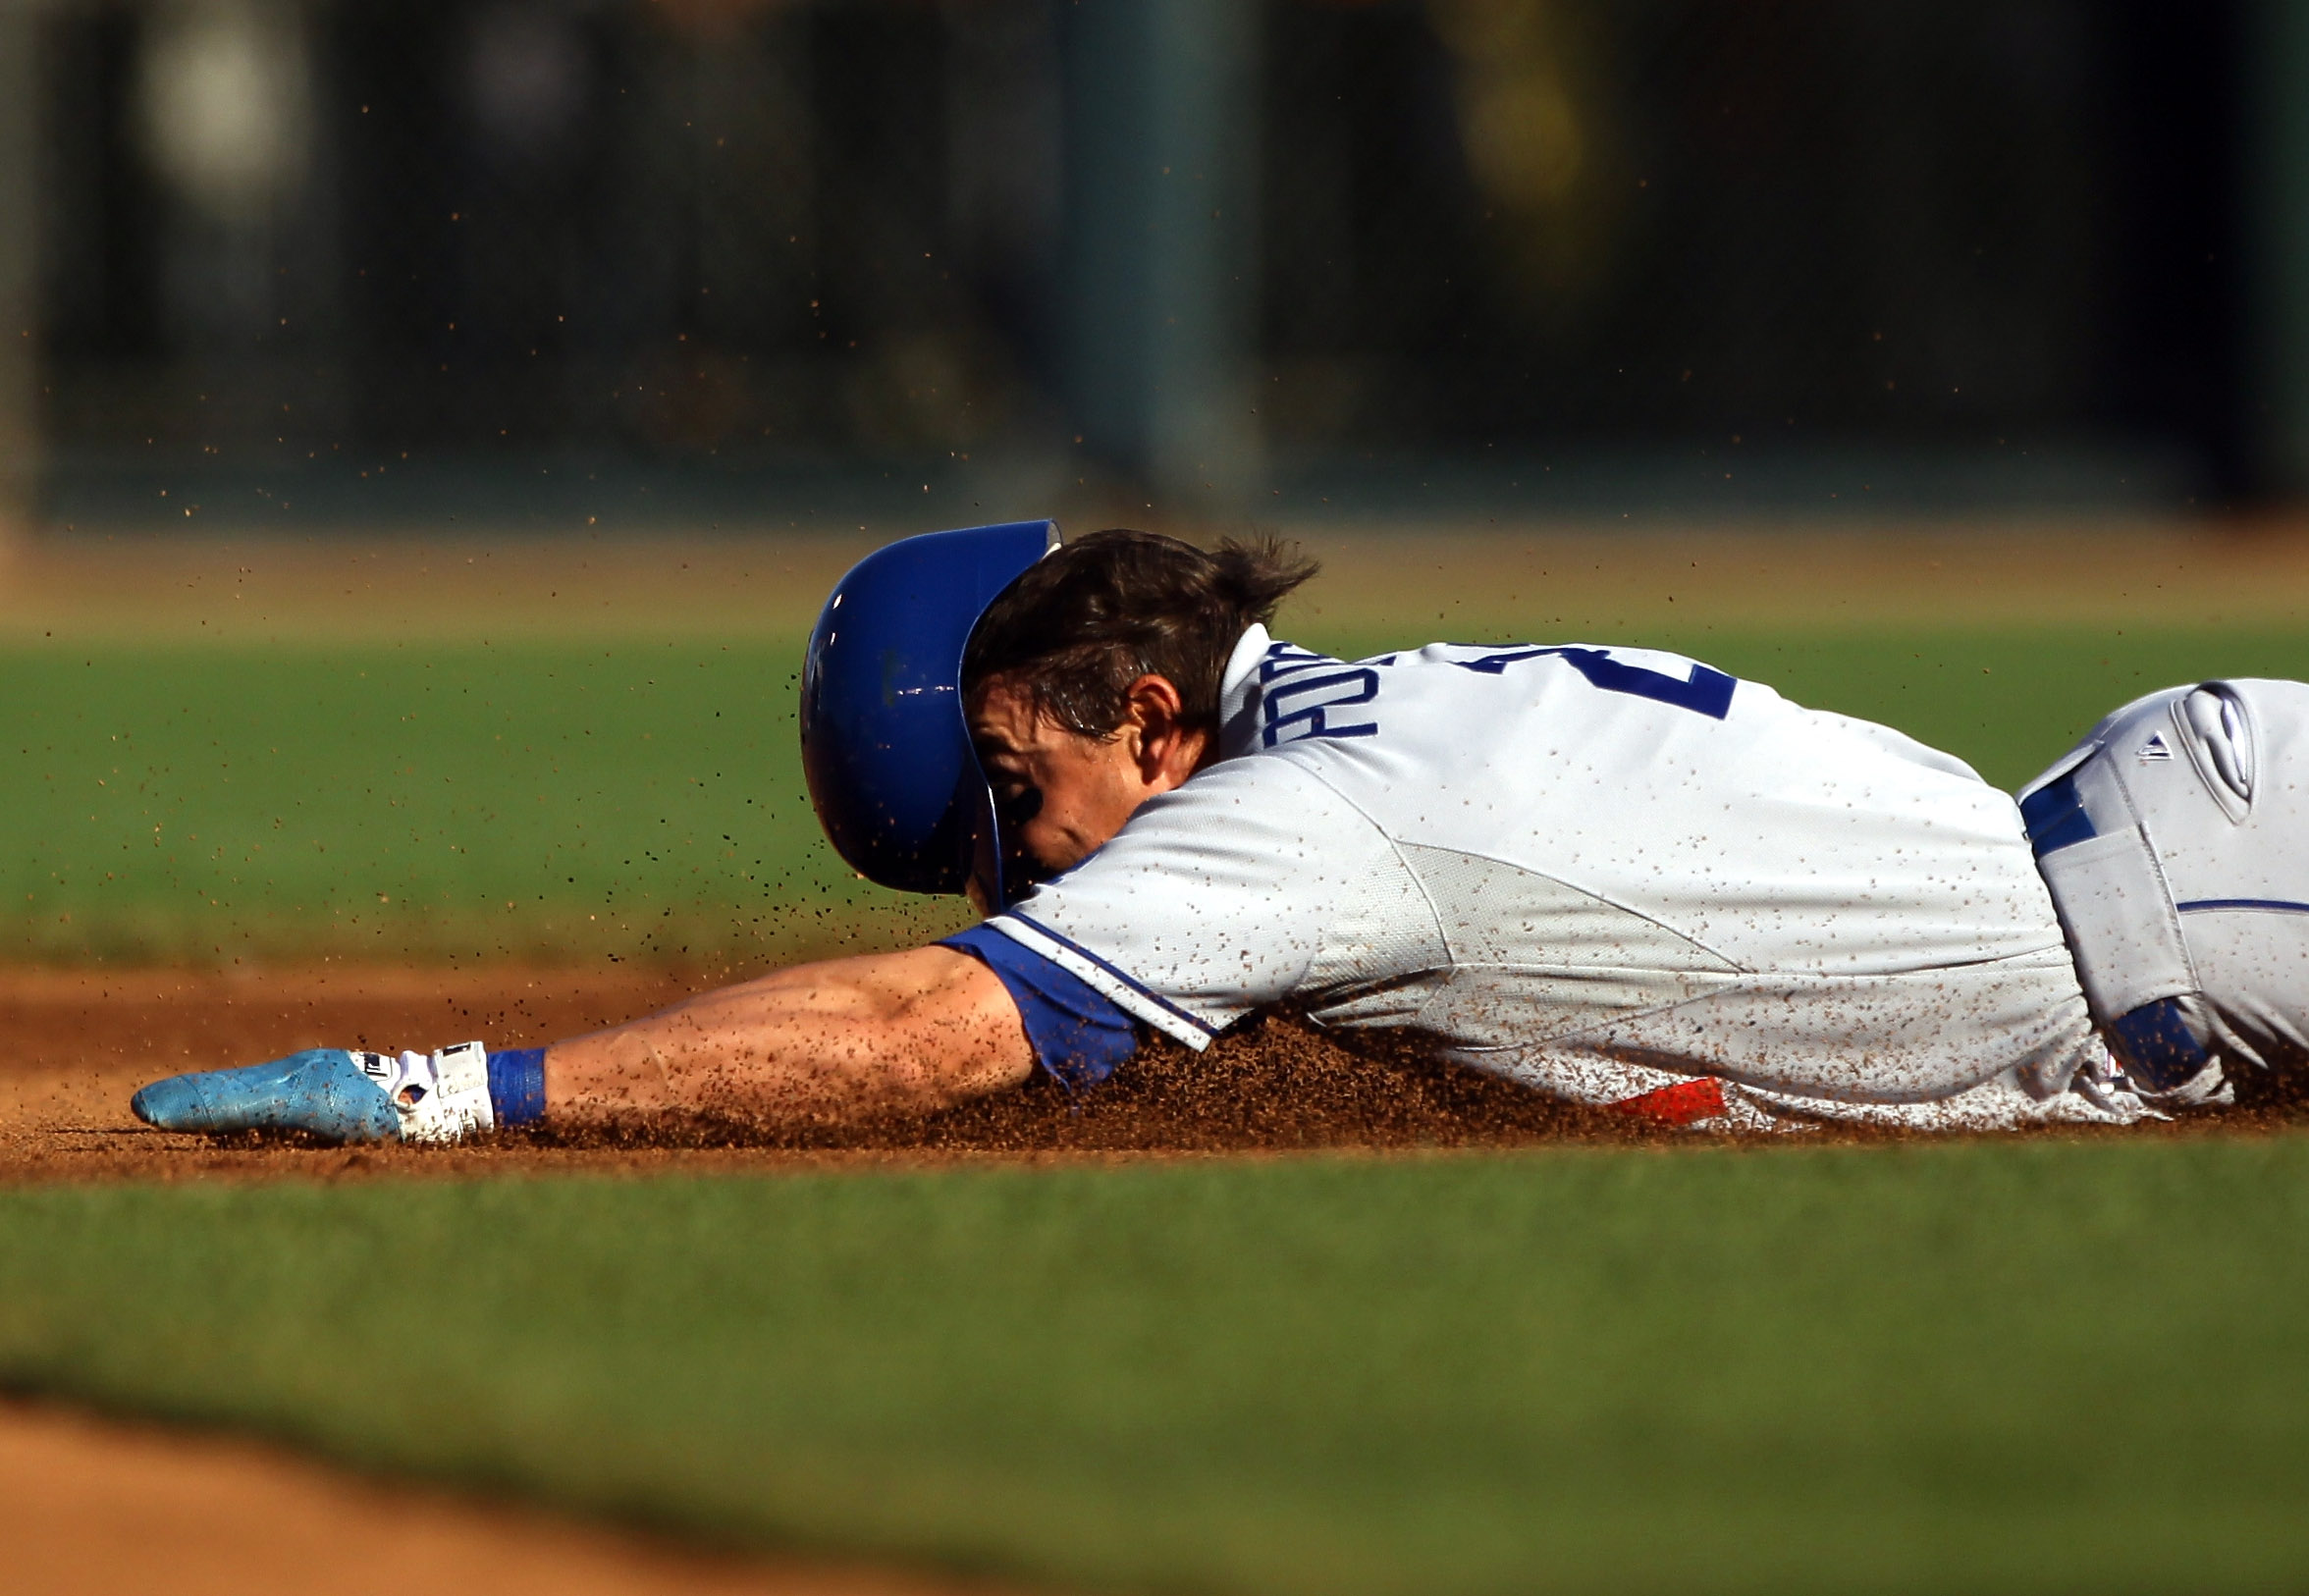 SAN FRANCISCO - AUGUST 01:  Scott Podsednik #21 of the Los Angeles Dodgers slides into second base during their game against the San Francisco Giants at AT&T Park on August 1, 2010 in San Francisco, California.  (Photo by Ezra Shaw/Getty Images)